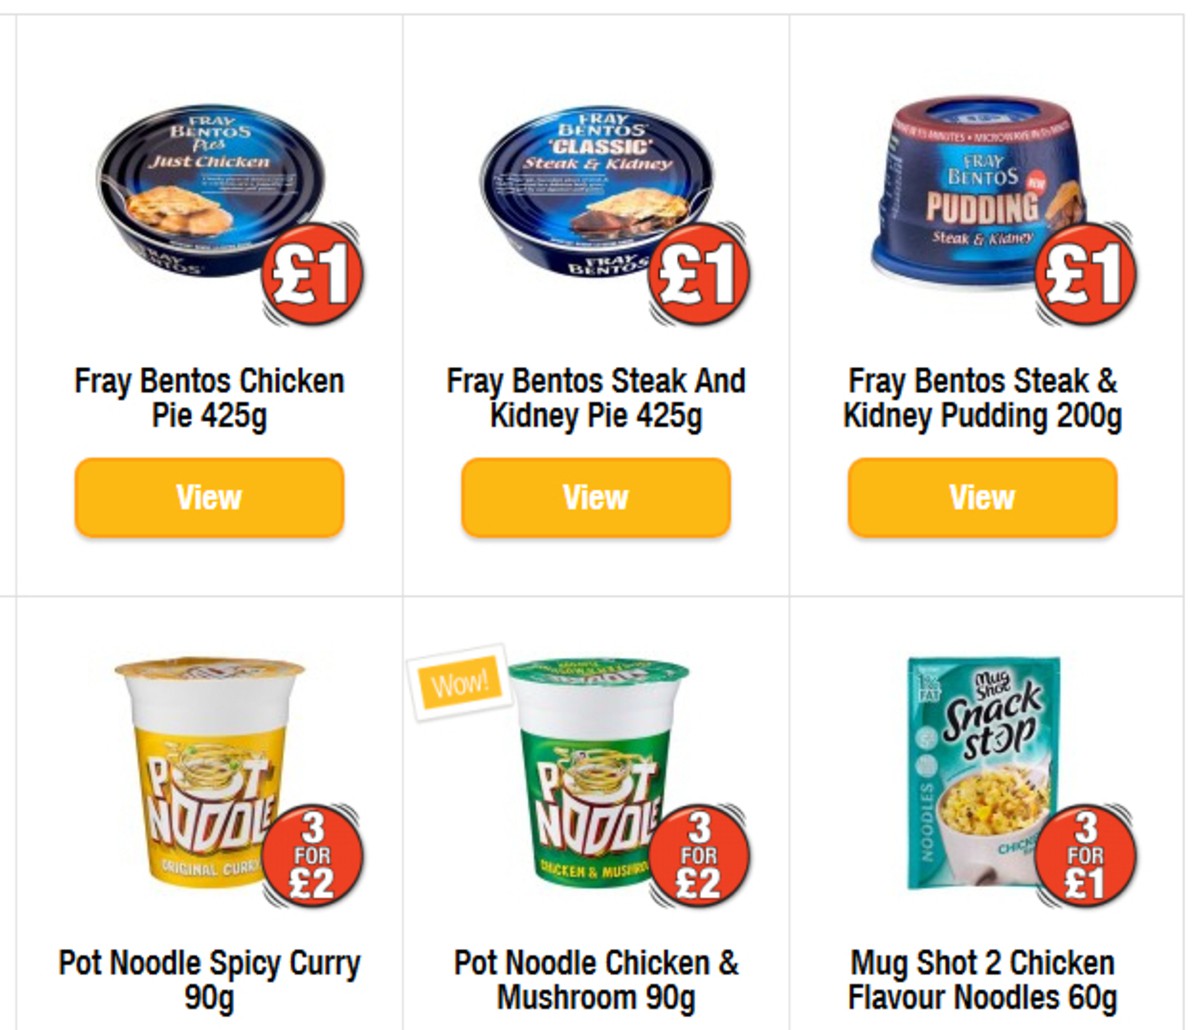 Poundland Offers from 2 April